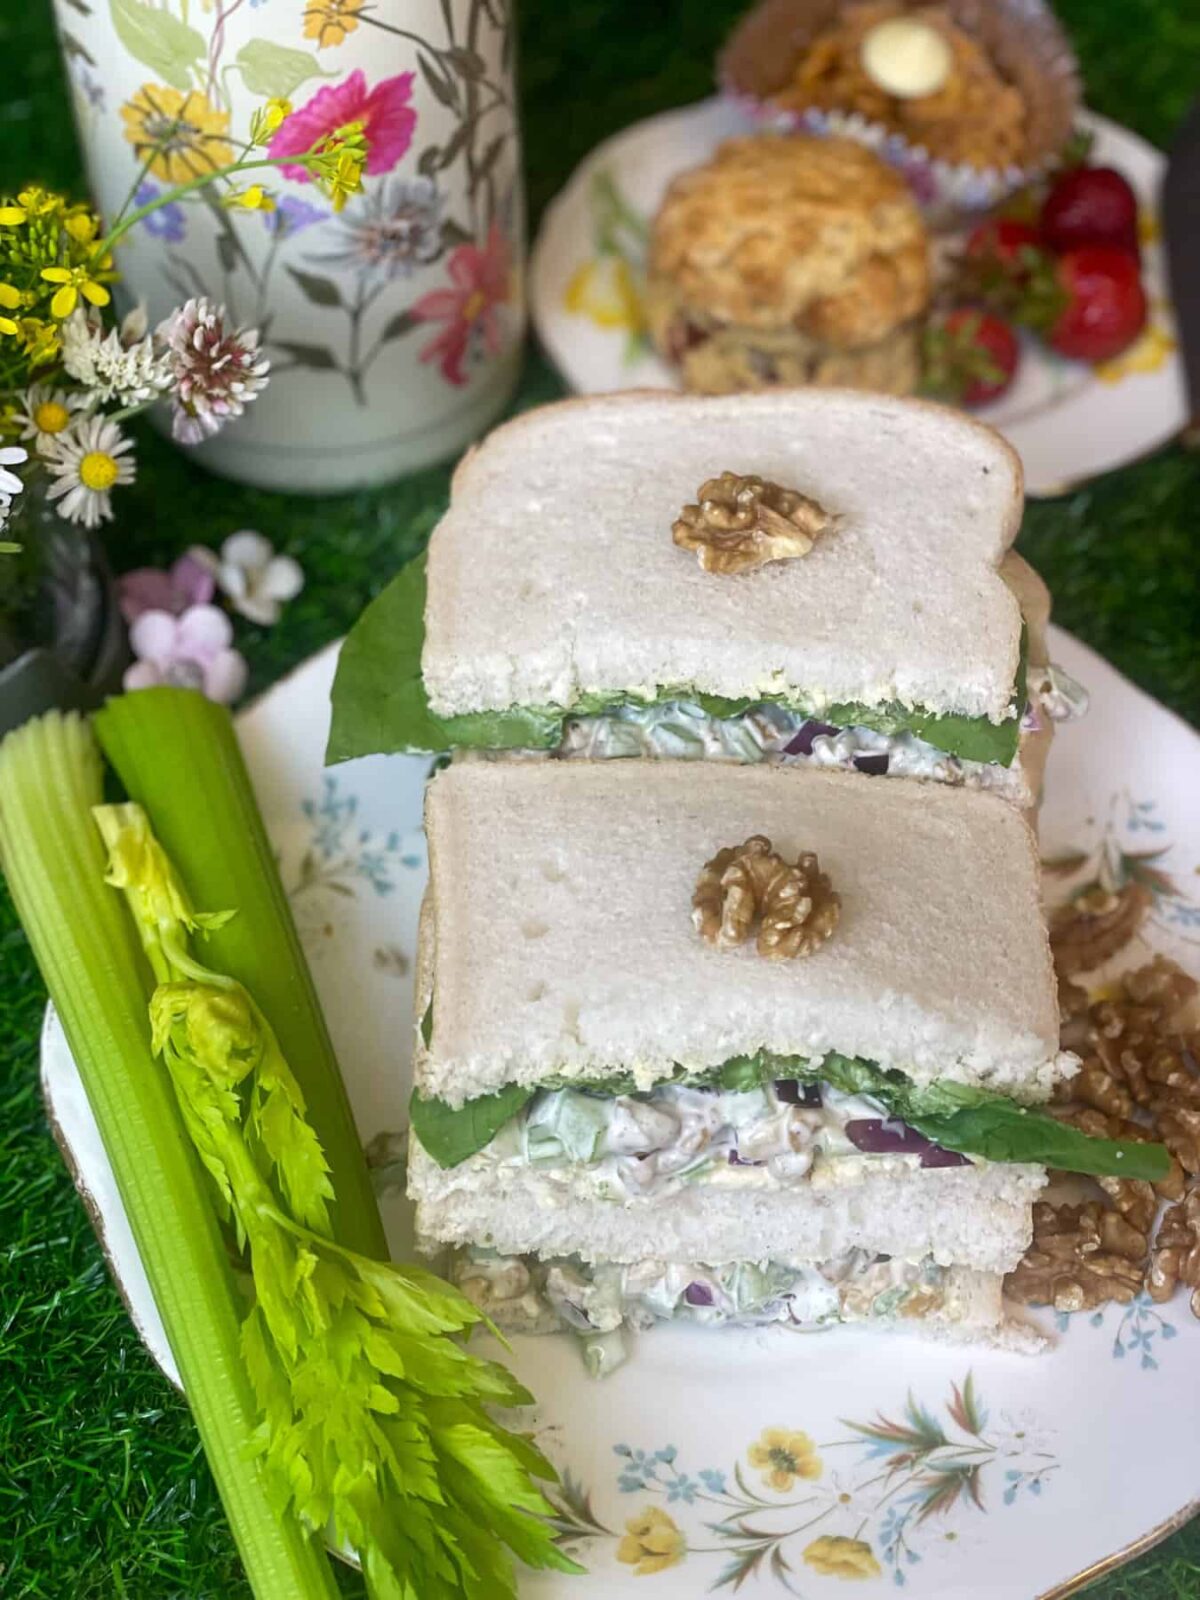 A plate of sandwiches with 3 celery stalks to the side and a flower flask and green grass background.